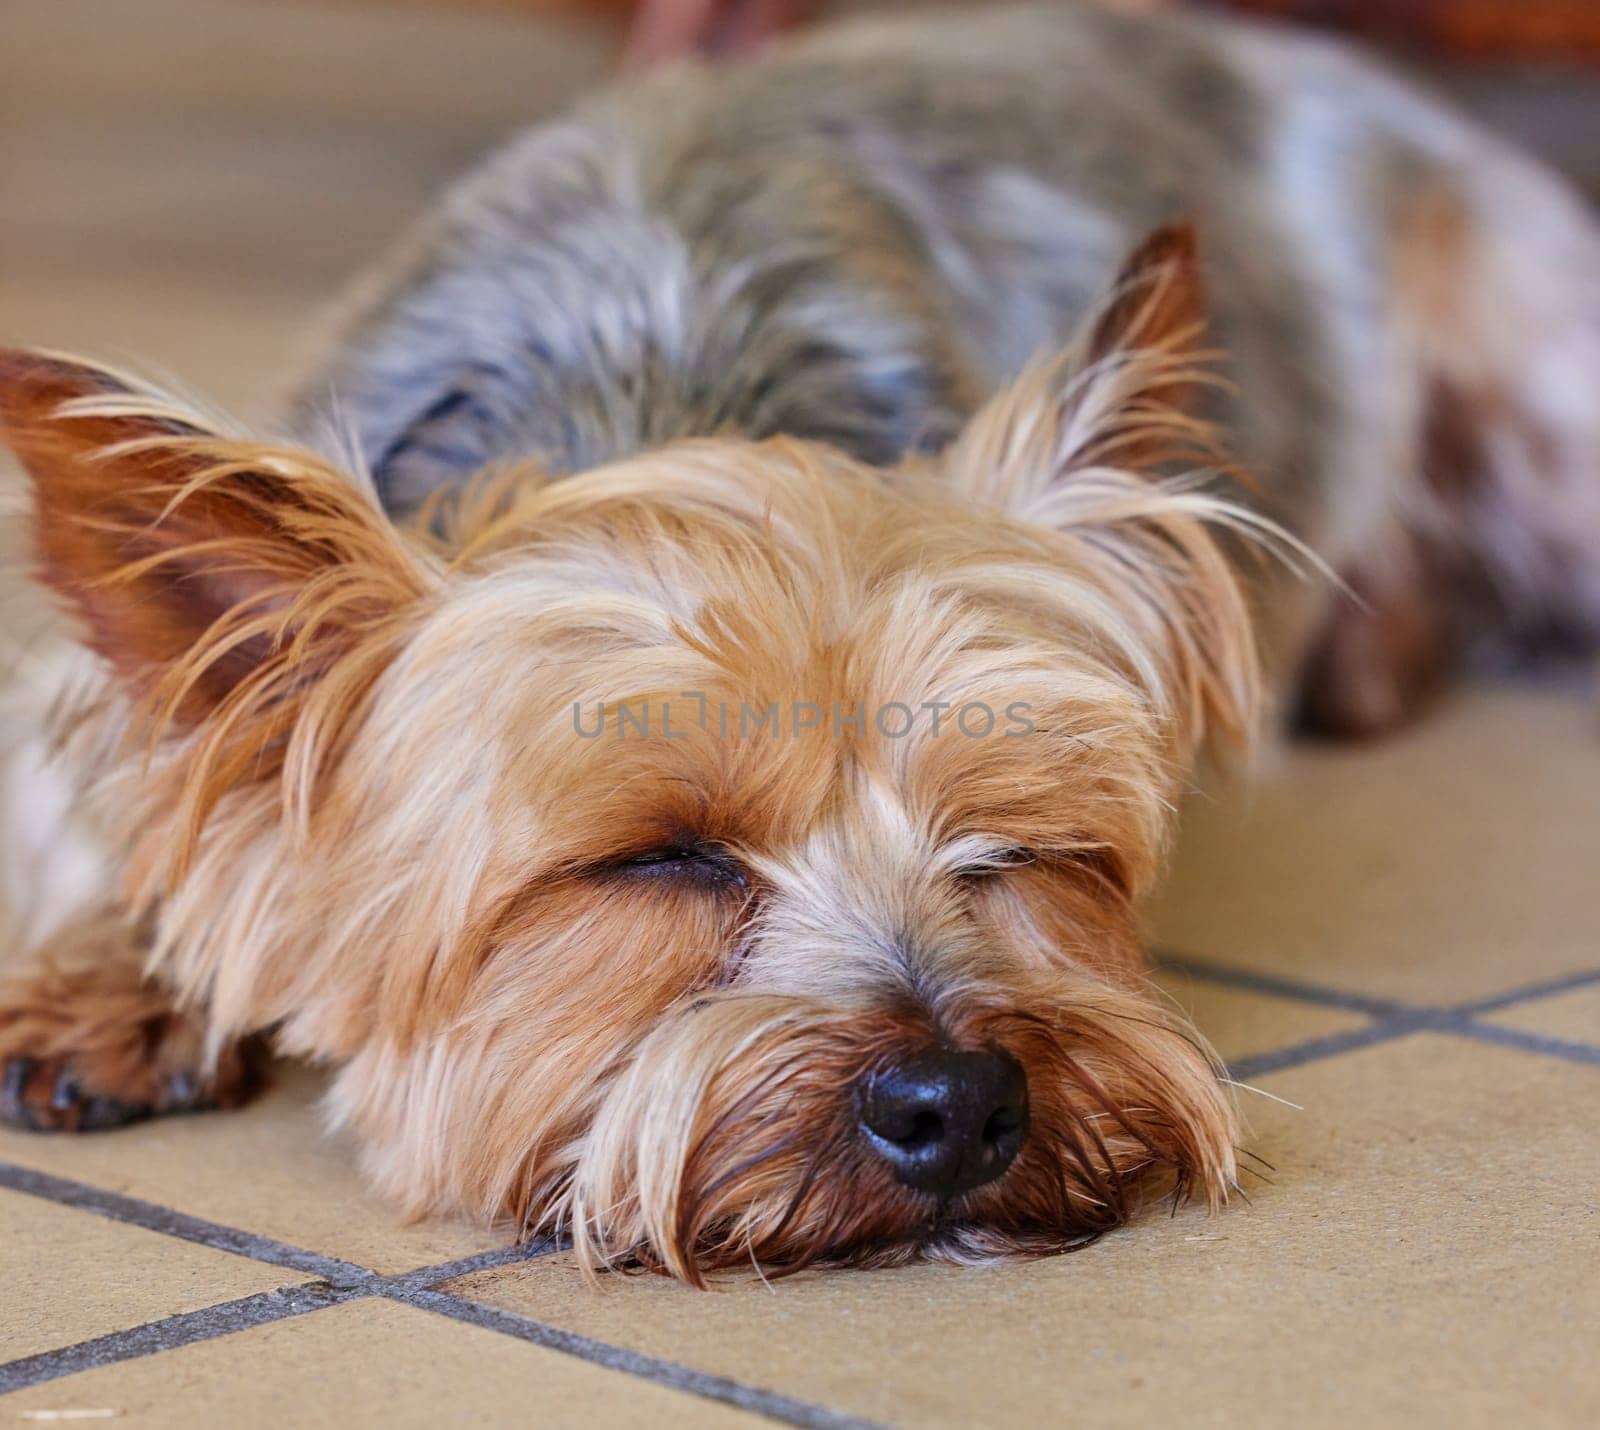 Sleeping puppy, dog and pet in the home, relax on kitchen floor and comfort with mans best friend. Adoption, foster and animal care, tired domestic yorkshire terrier with nap or asleep for wellness by YuriArcurs